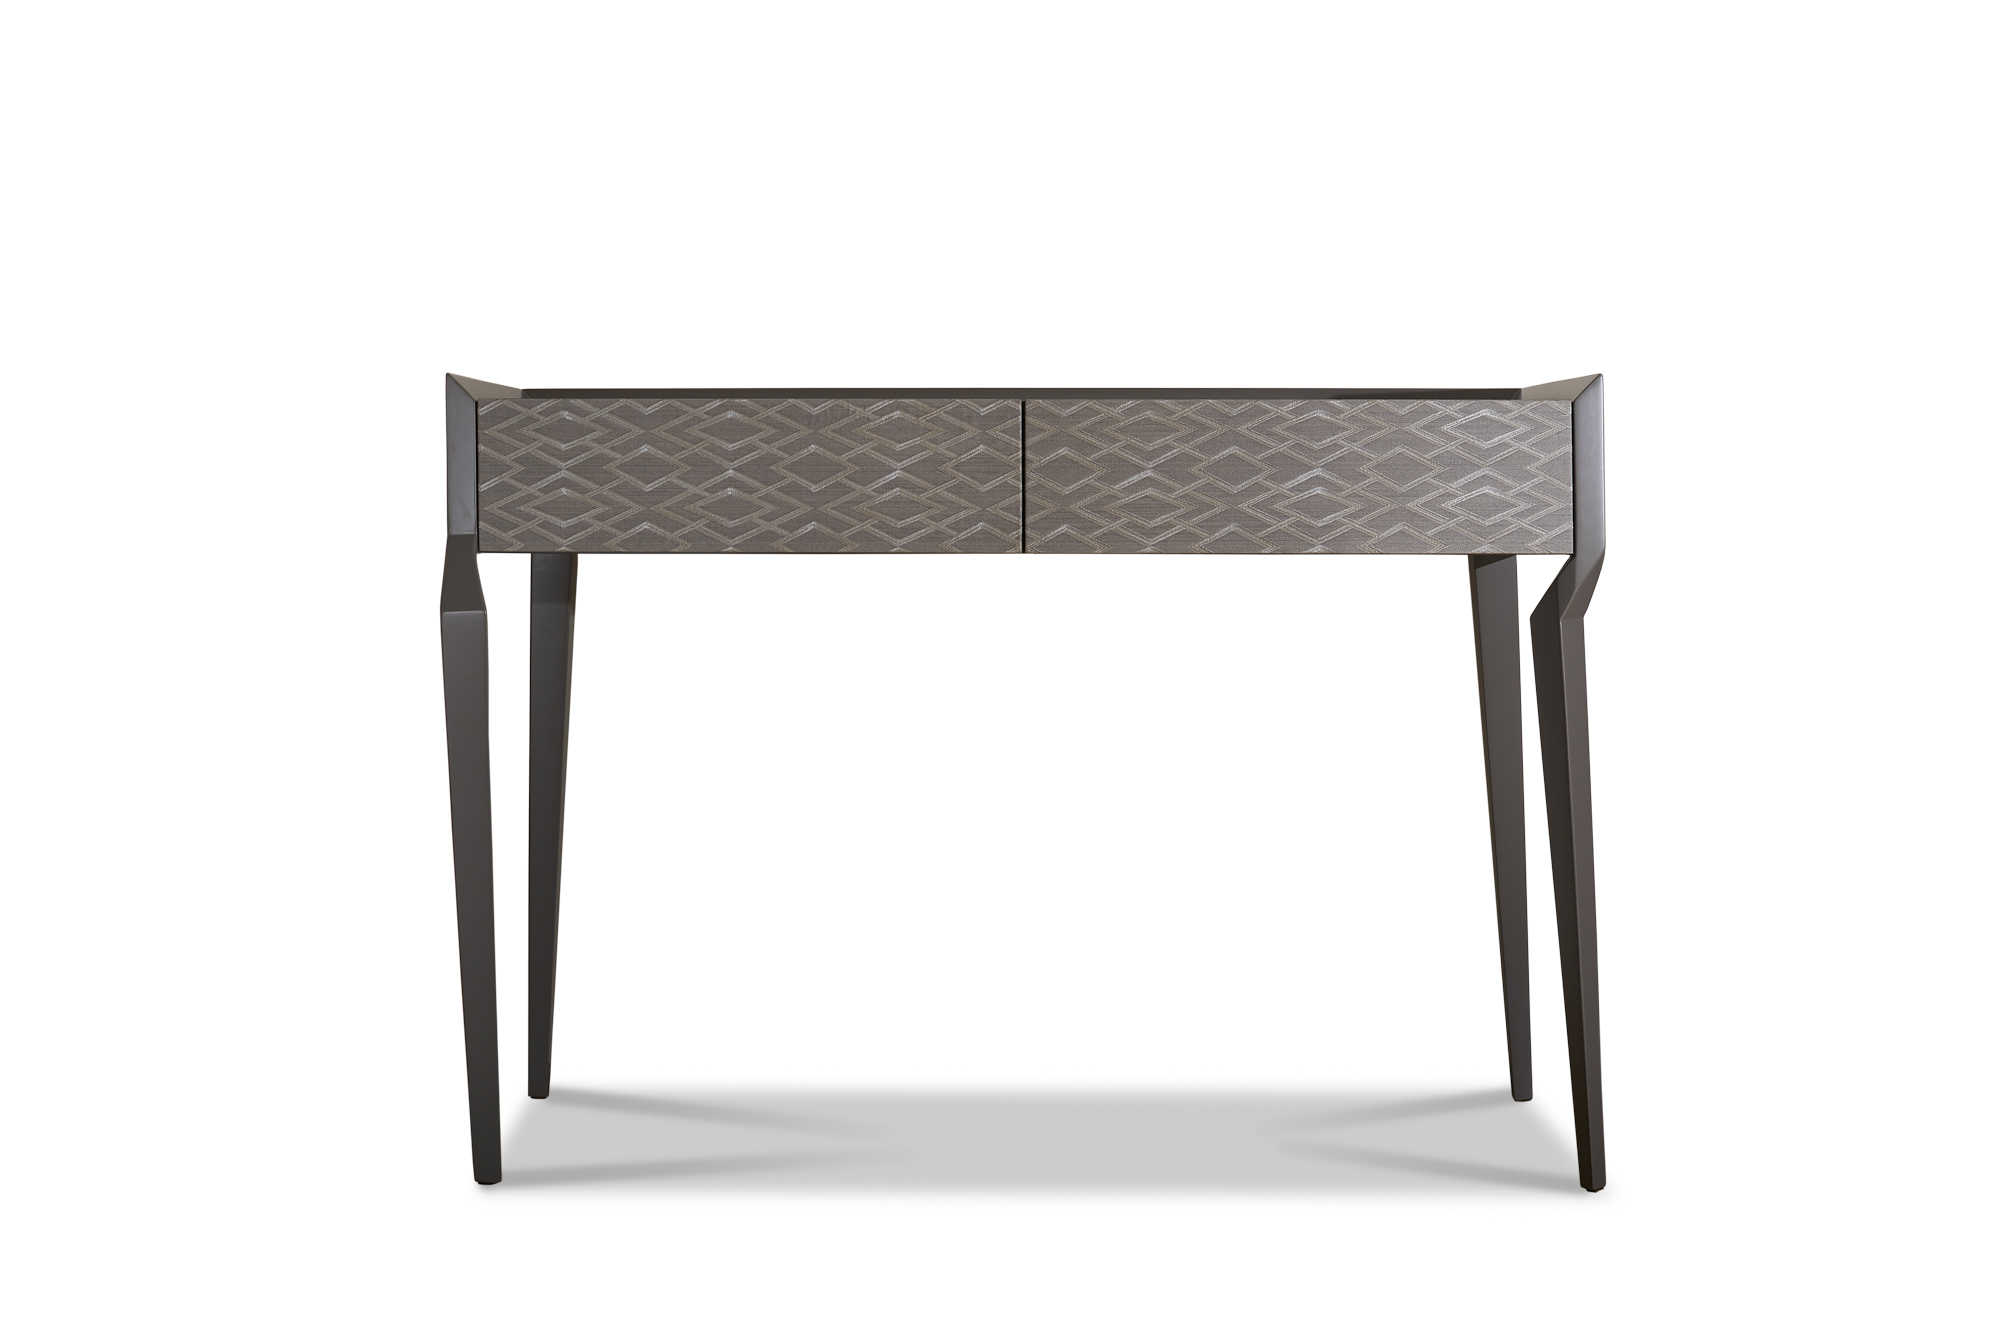 Angular legs and an inset top create a striking silhouette that defines this exquisite console. Functional drawers are completed with a geometric vinyl wallcovering.